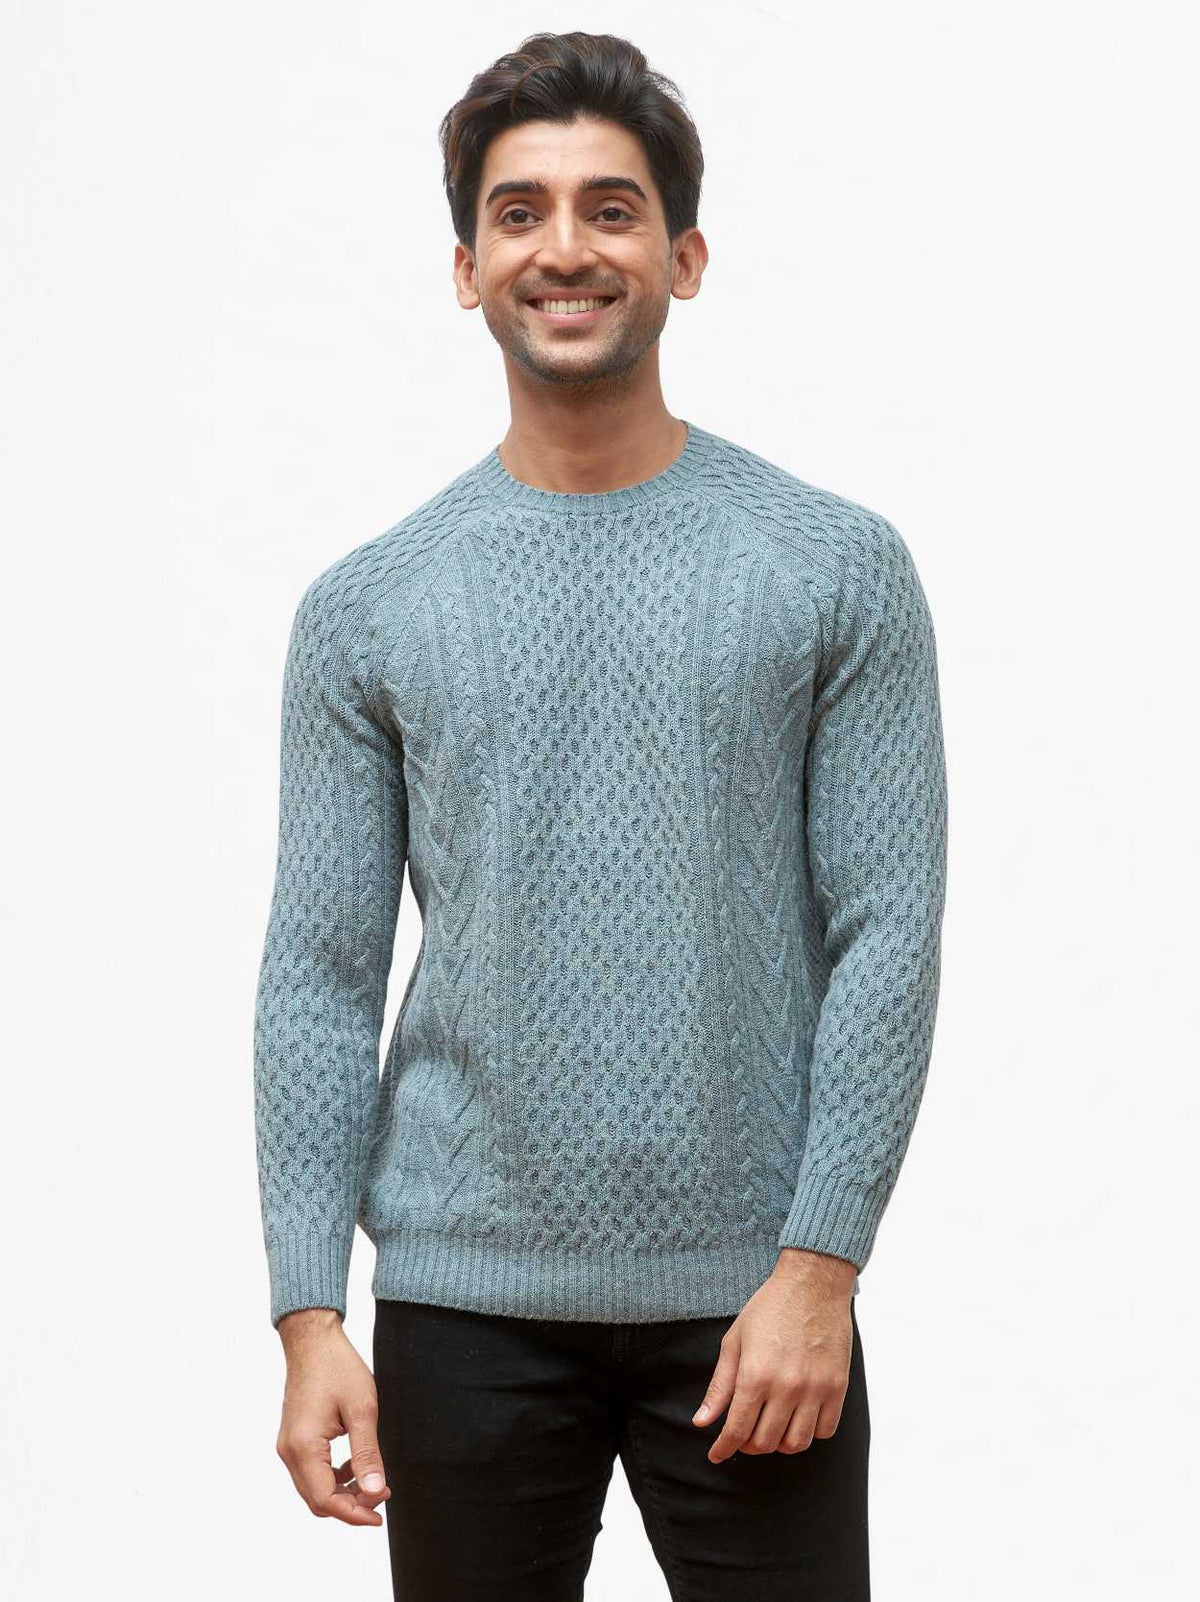 Oliver Charles - Winter Cable Knit